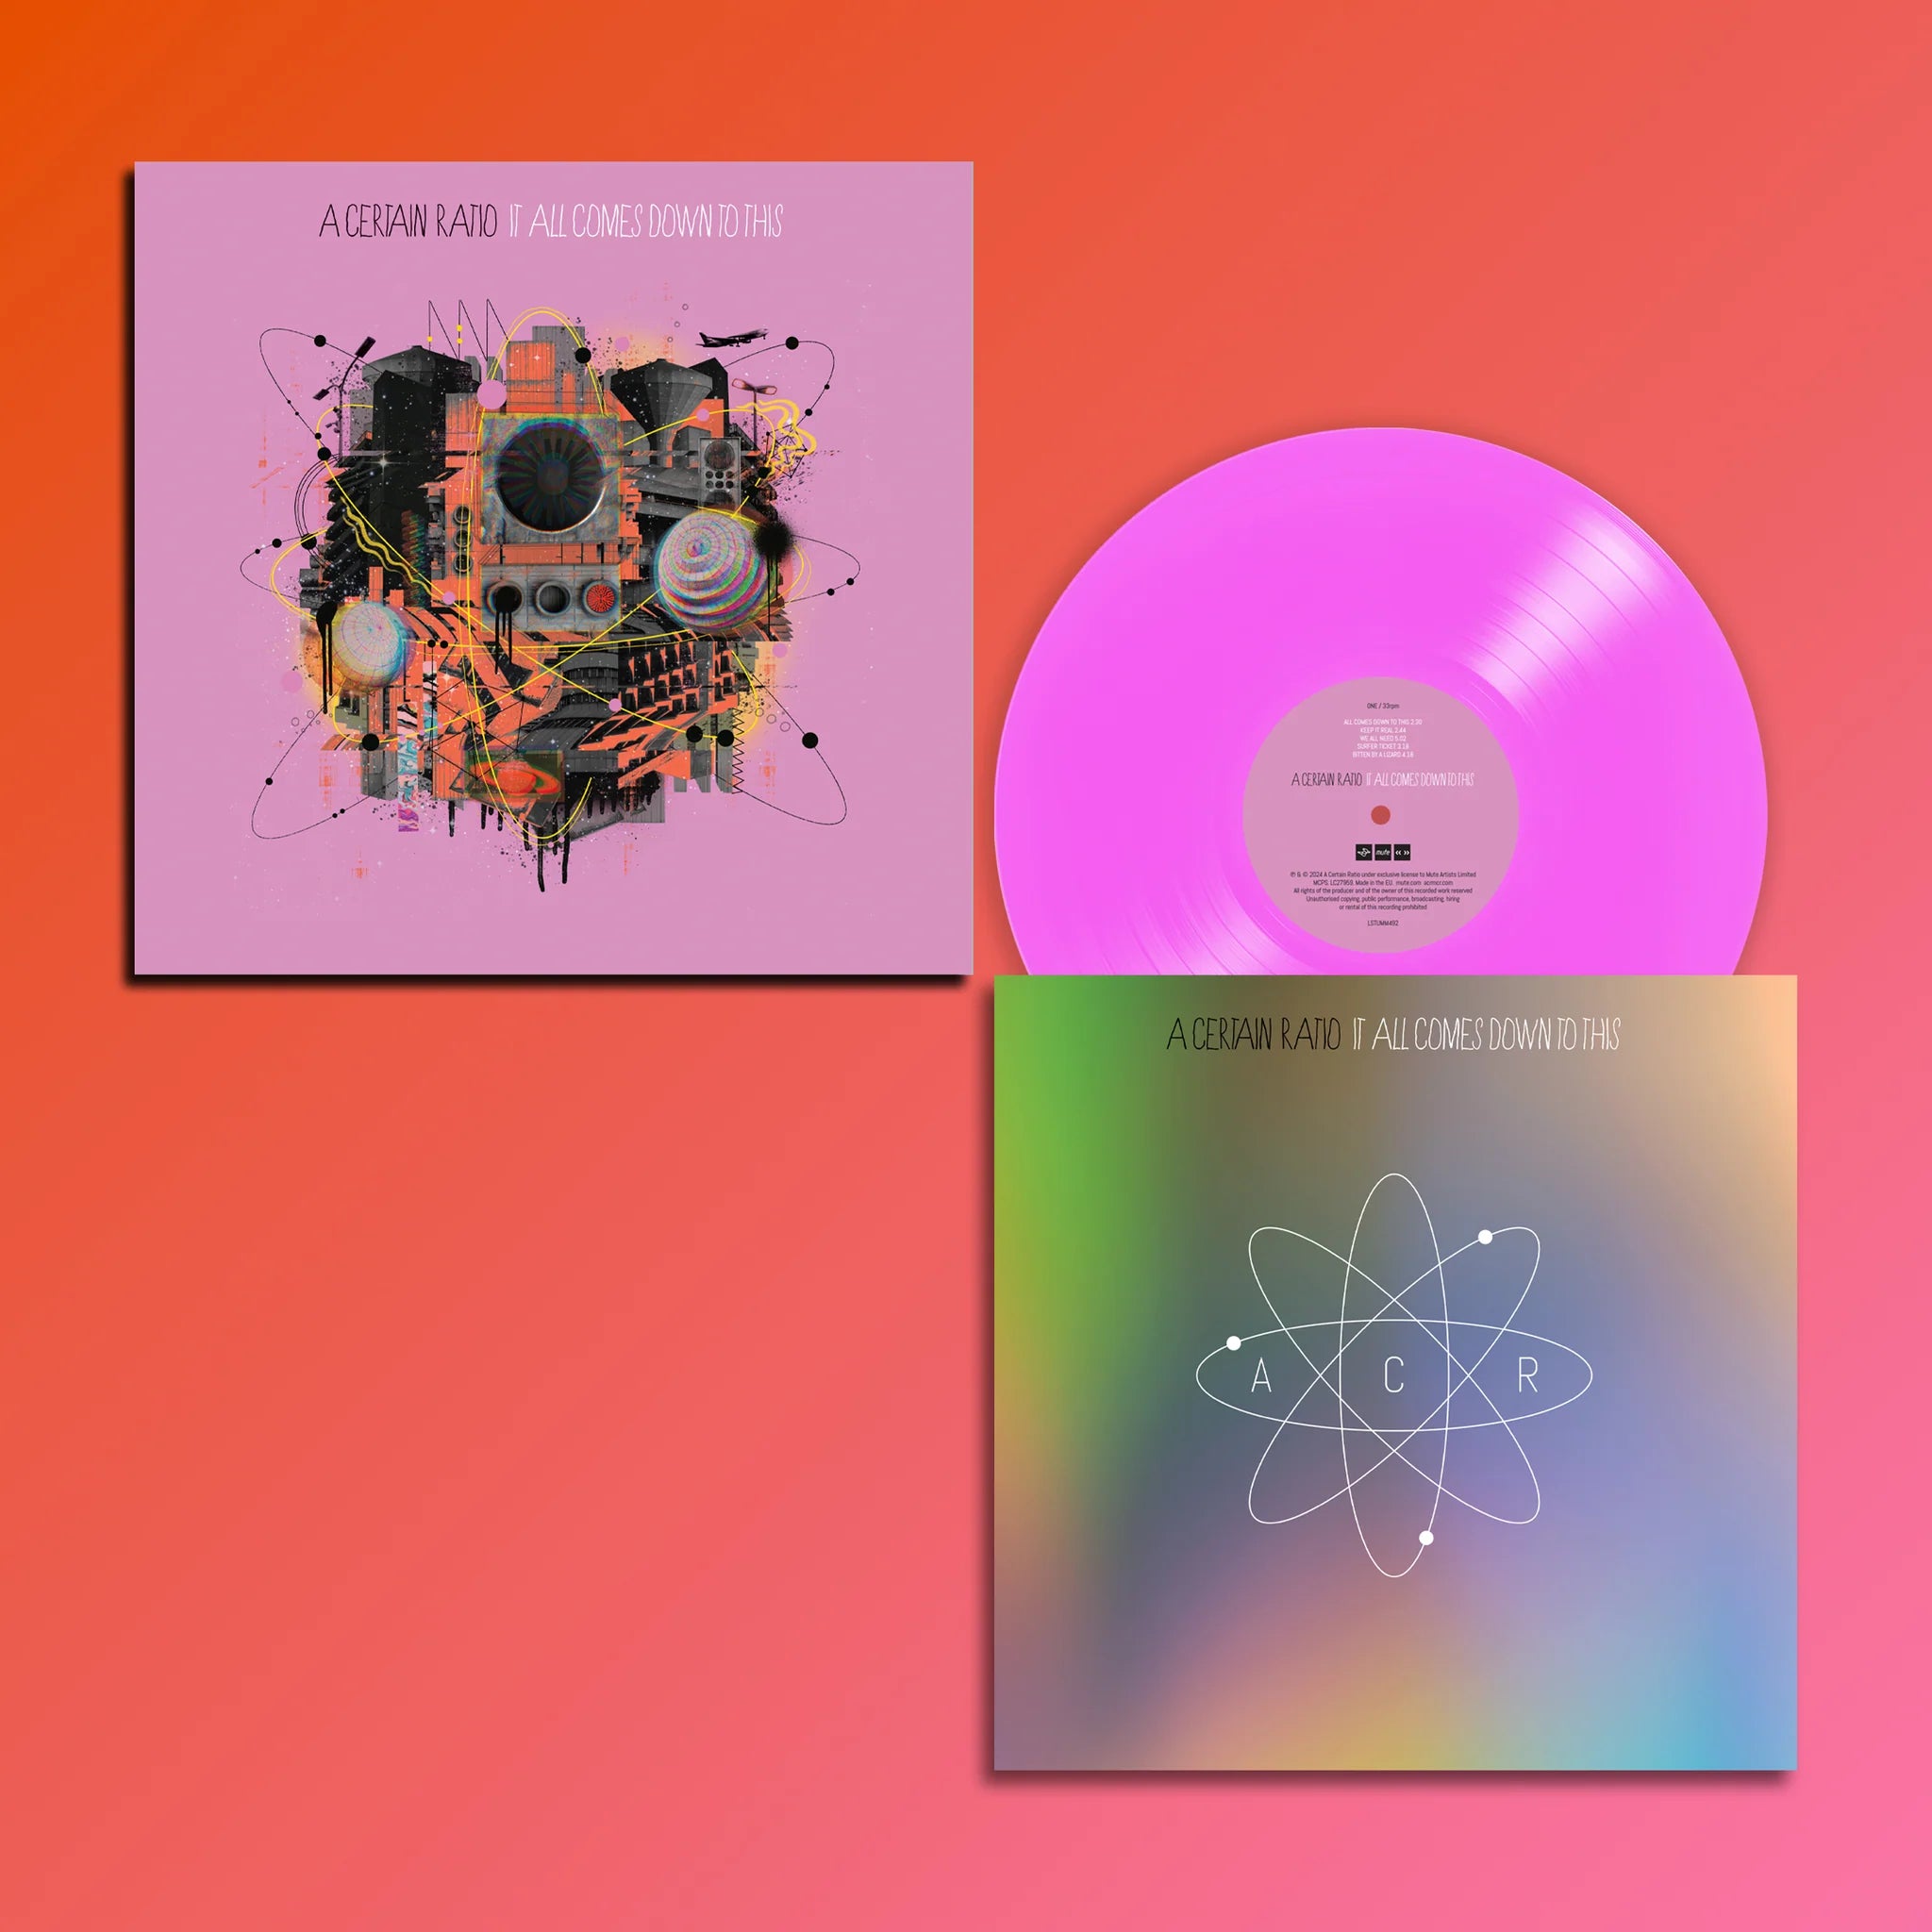 It All Comes Down To This: Limited Neon Pink Vinyl LP + Signed Print